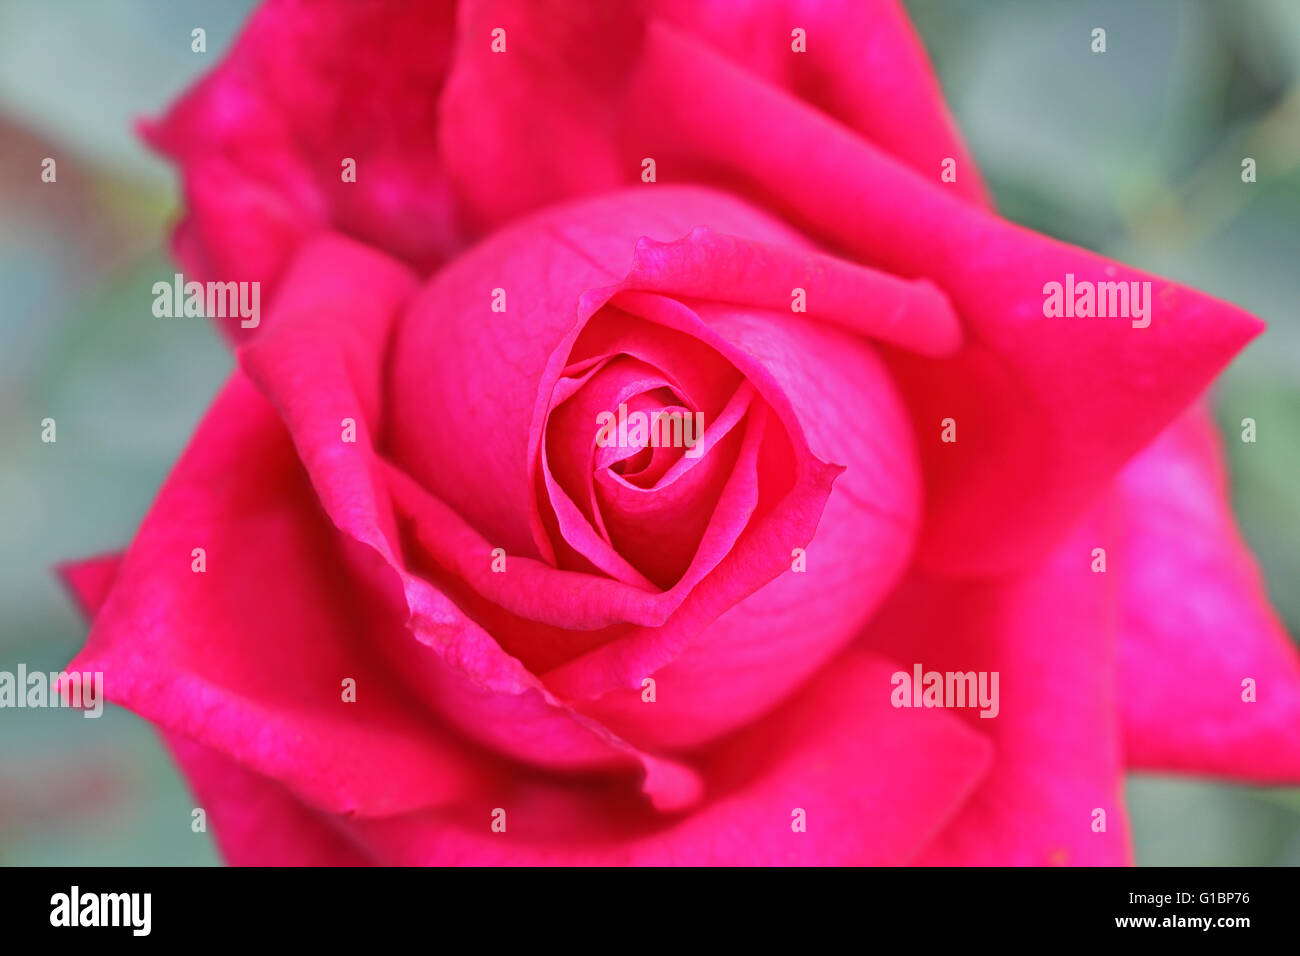 Close up of a vibrant red rose Stock Photo